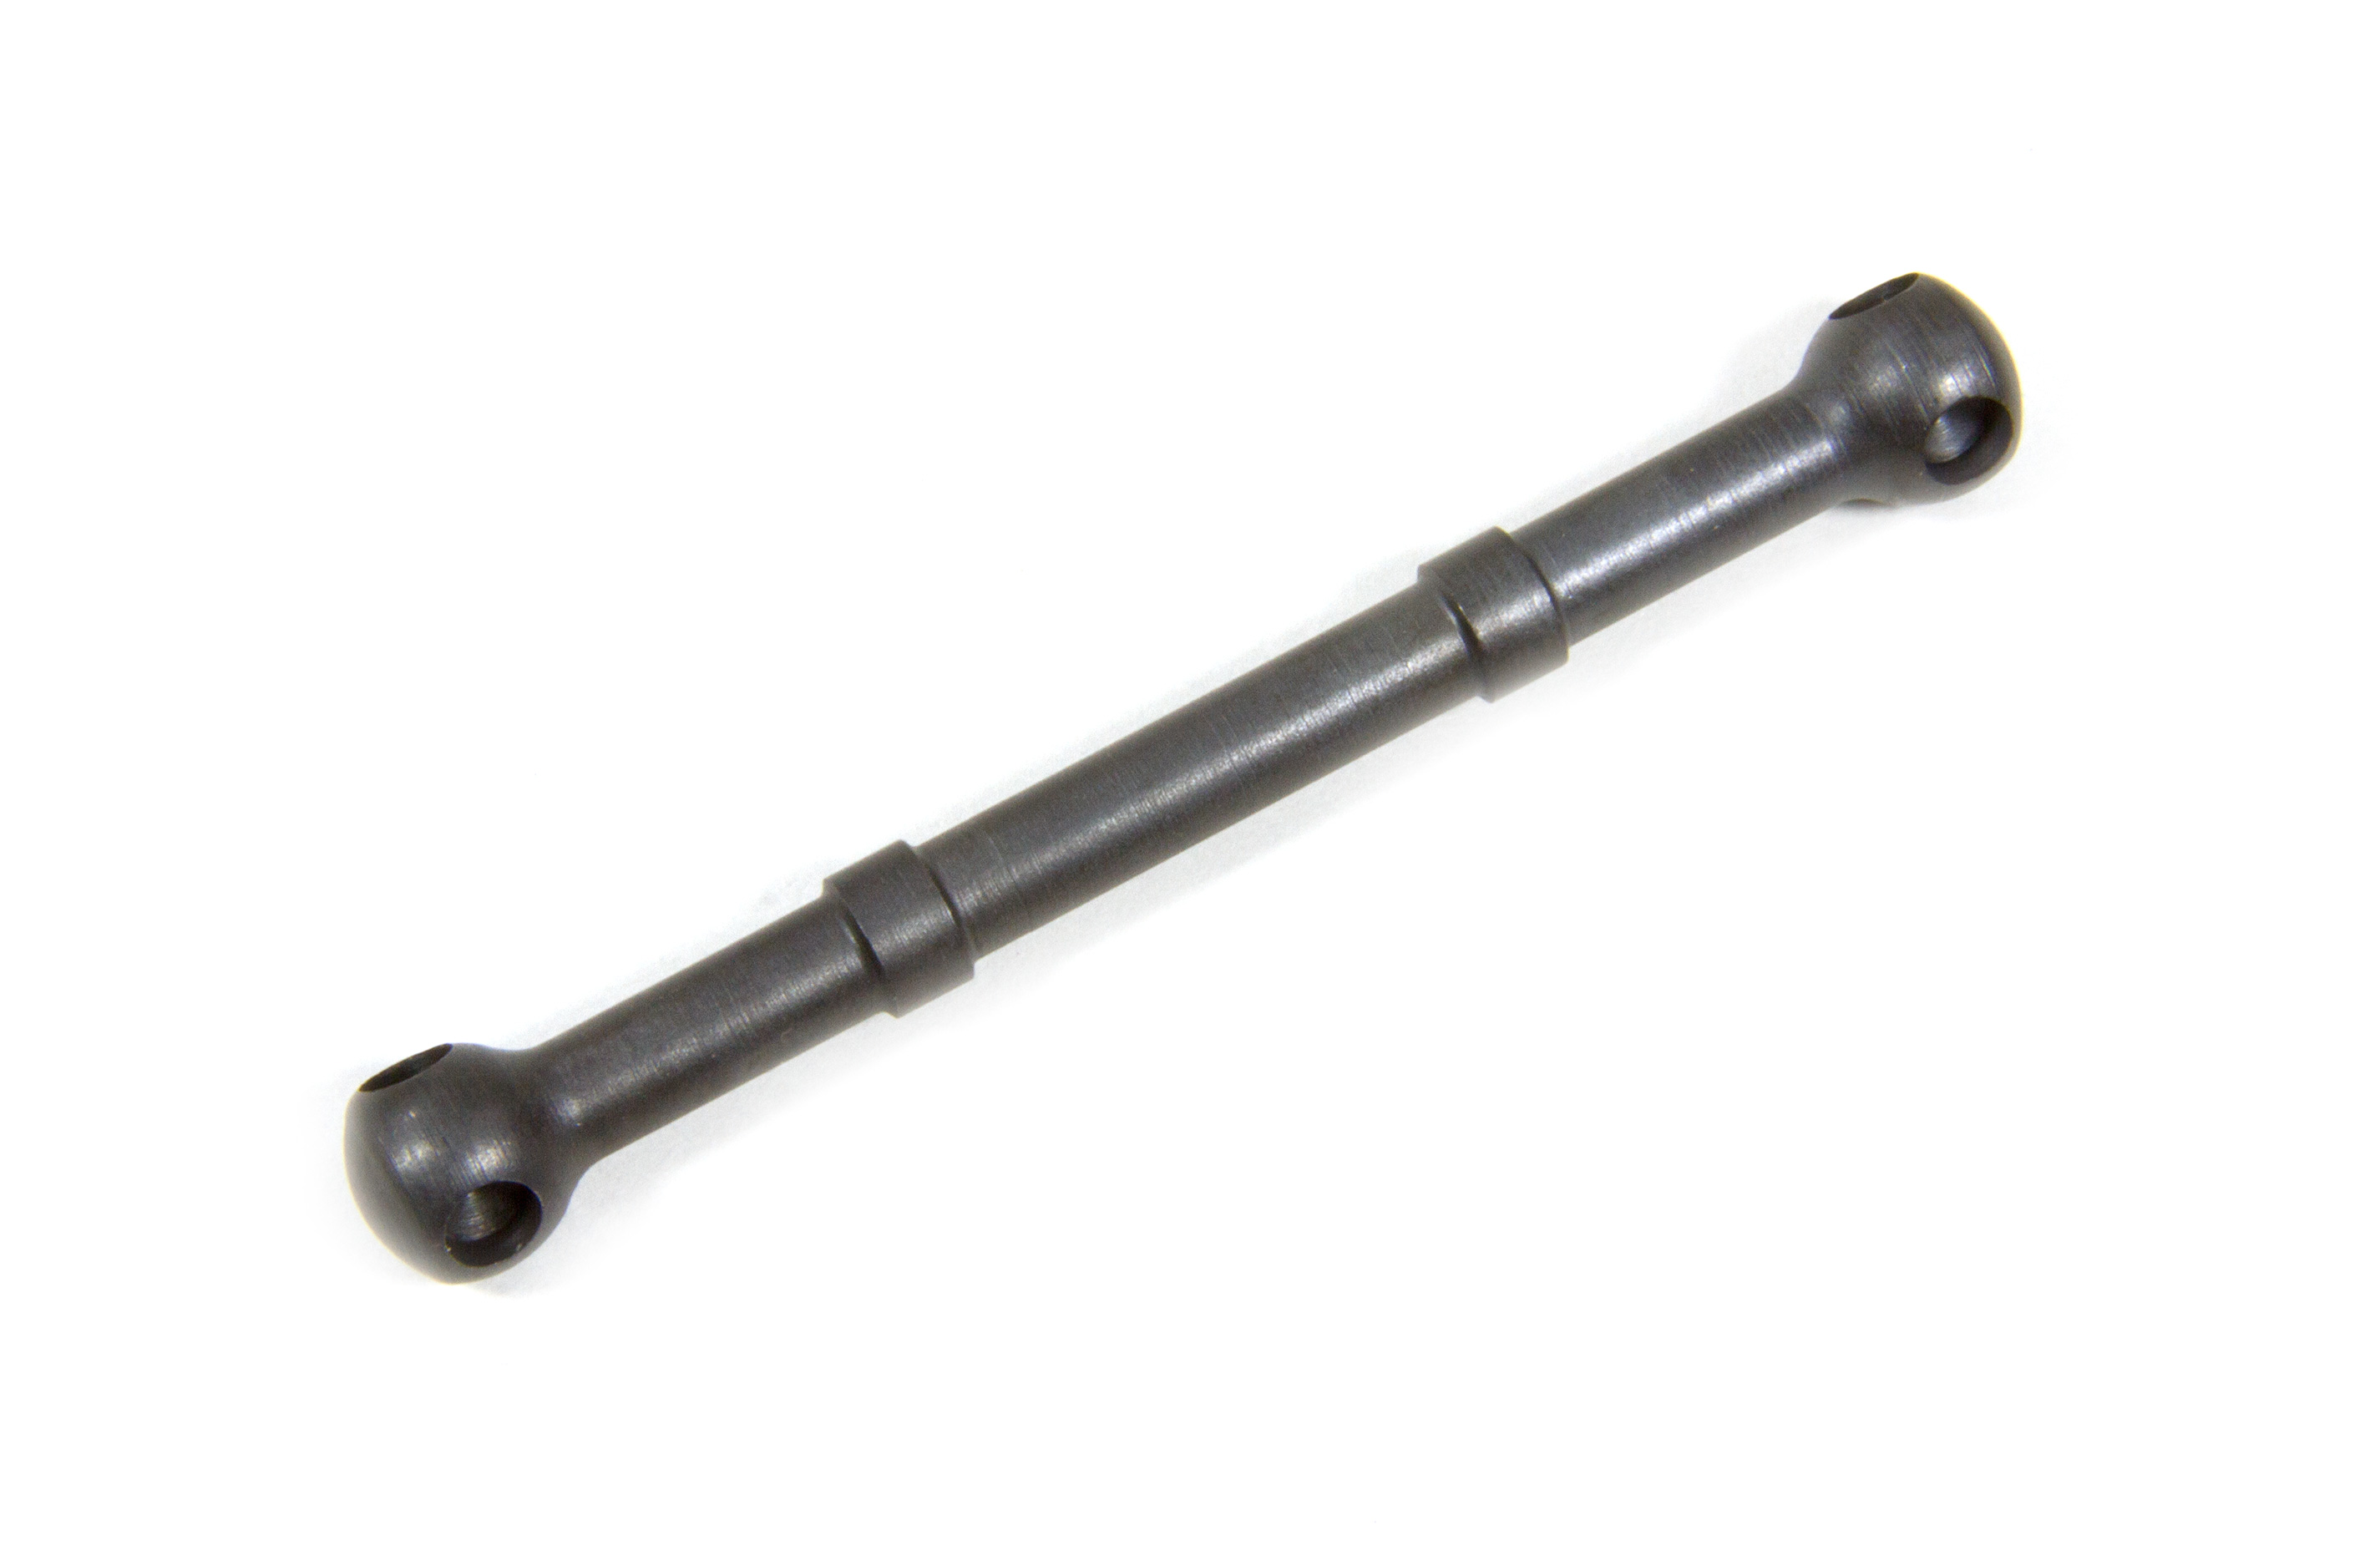 32594 Carson driveshaft for ball drive Attack / C5 / R5